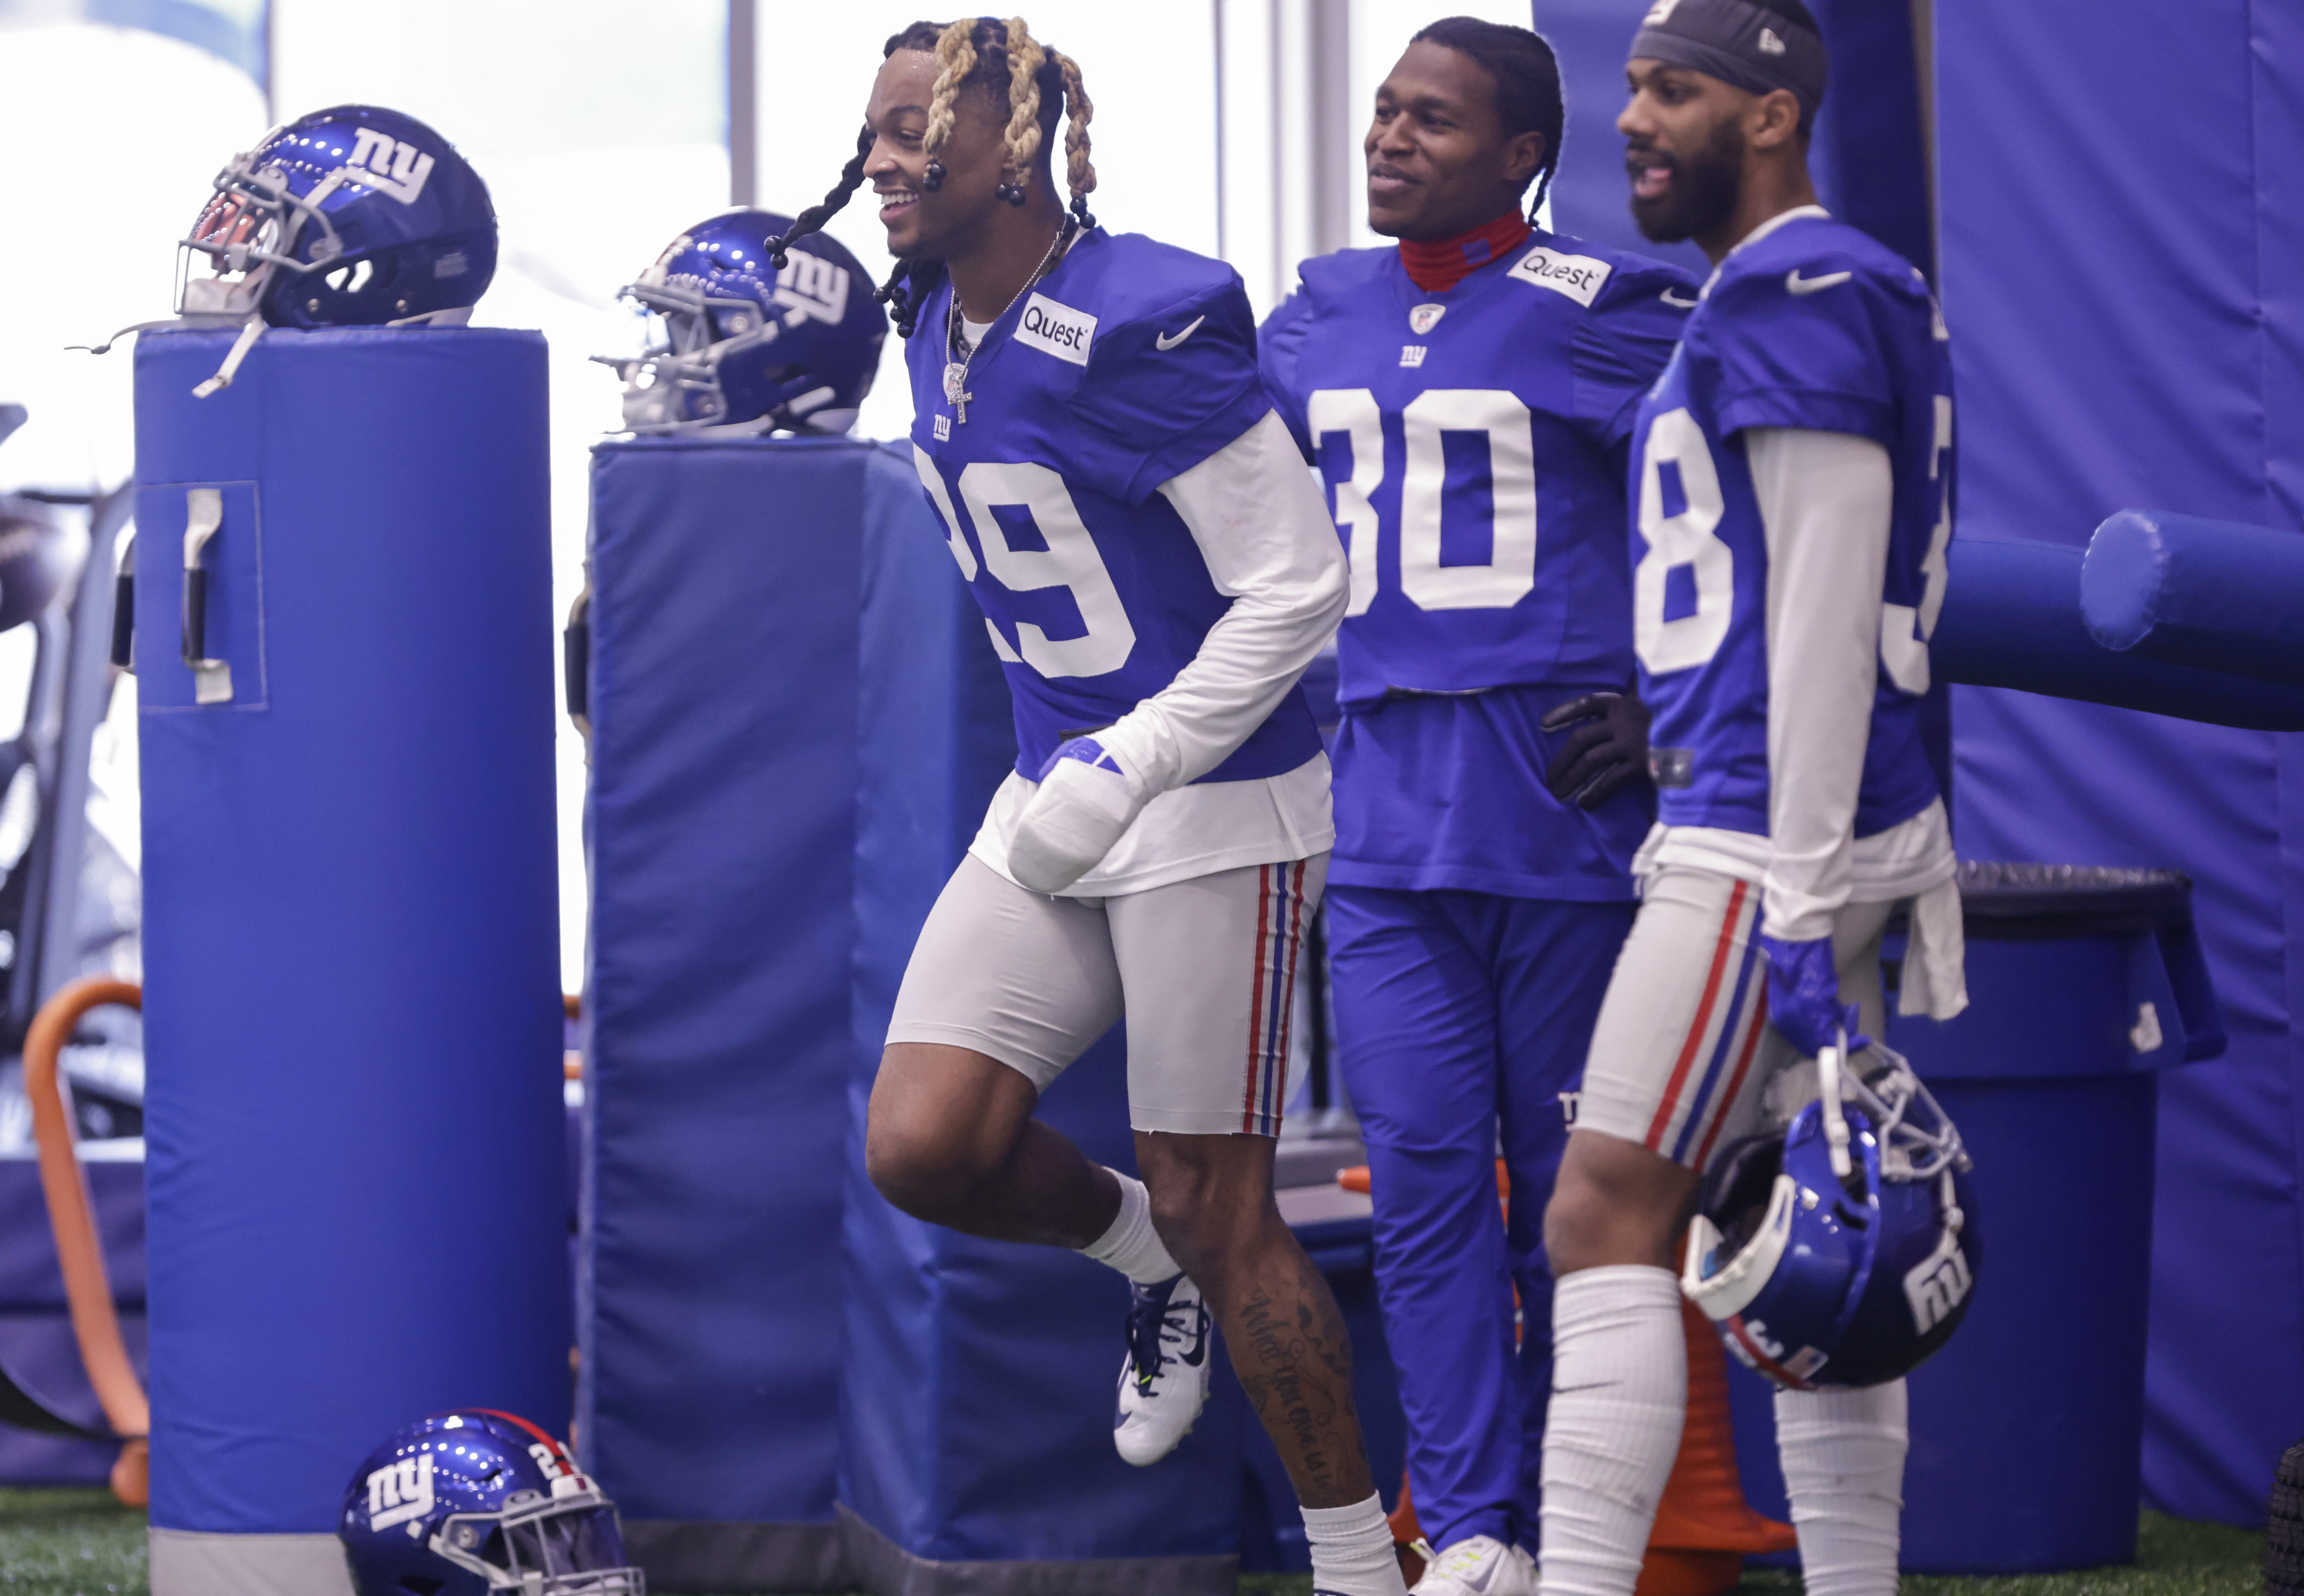 Giants practice before NFL wildcard playoff game against Minnesota Vikings  